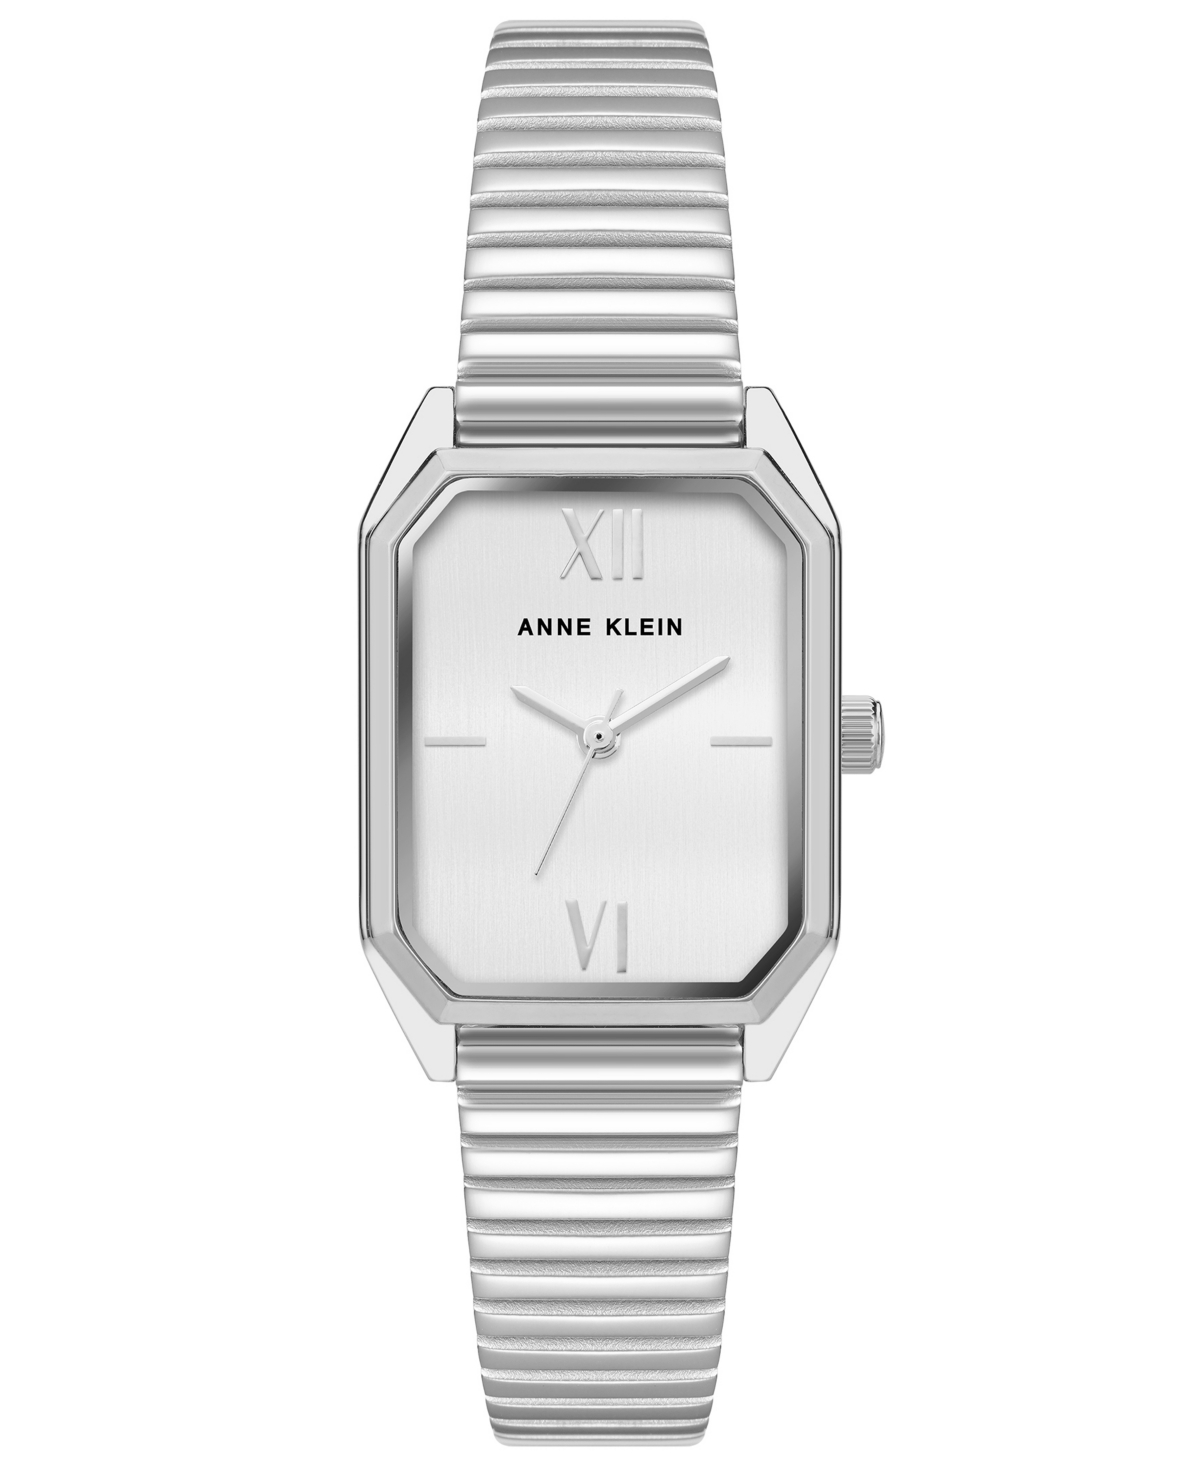 Anne Klein Women's Square Silver-tone Stainless Steel Watch, 35mm